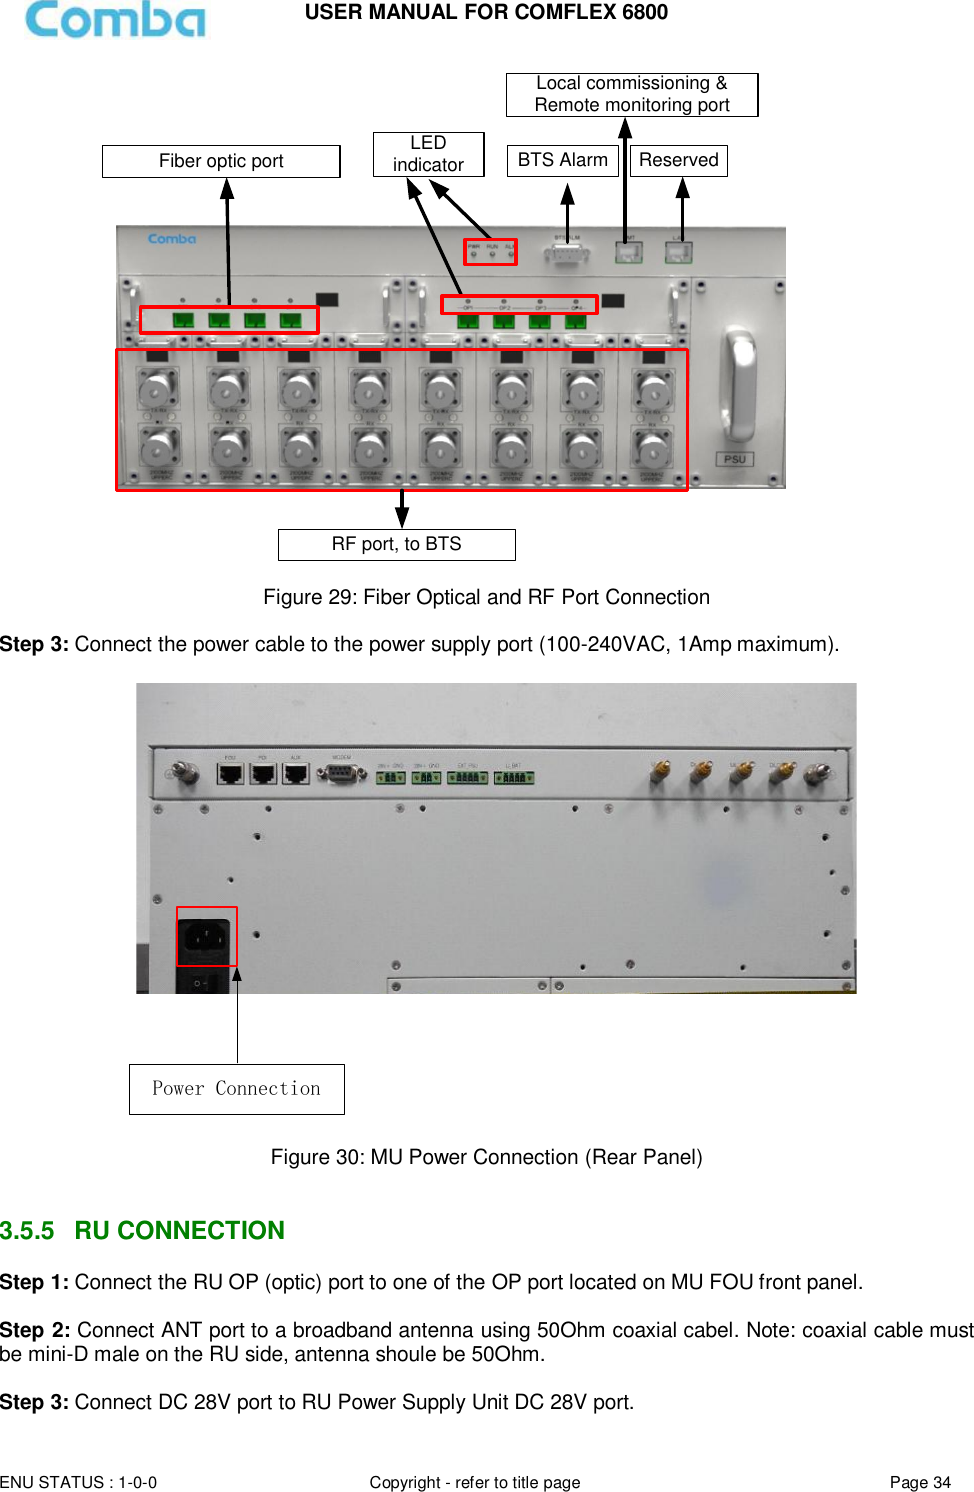 USER MANUAL FOR COMFLEX 6800  ENU STATUS : 1-0-0 Copyright - refer to title page Page 34     Local commissioning &amp; Remote monitoring portBTS Alarm ReservedFiber optic portRF port, to BTSLED indicator  Figure 29: Fiber Optical and RF Port Connection  Step 3: Connect the power cable to the power supply port (100-240VAC, 1Amp maximum).    Power Connection Figure 30: MU Power Connection (Rear Panel)   3.5.5  RU CONNECTION  Step 1: Connect the RU OP (optic) port to one of the OP port located on MU FOU front panel.  Step 2: Connect ANT port to a broadband antenna using 50Ohm coaxial cabel. Note: coaxial cable must be mini-D male on the RU side, antenna shoule be 50Ohm.   Step 3: Connect DC 28V port to RU Power Supply Unit DC 28V port. 